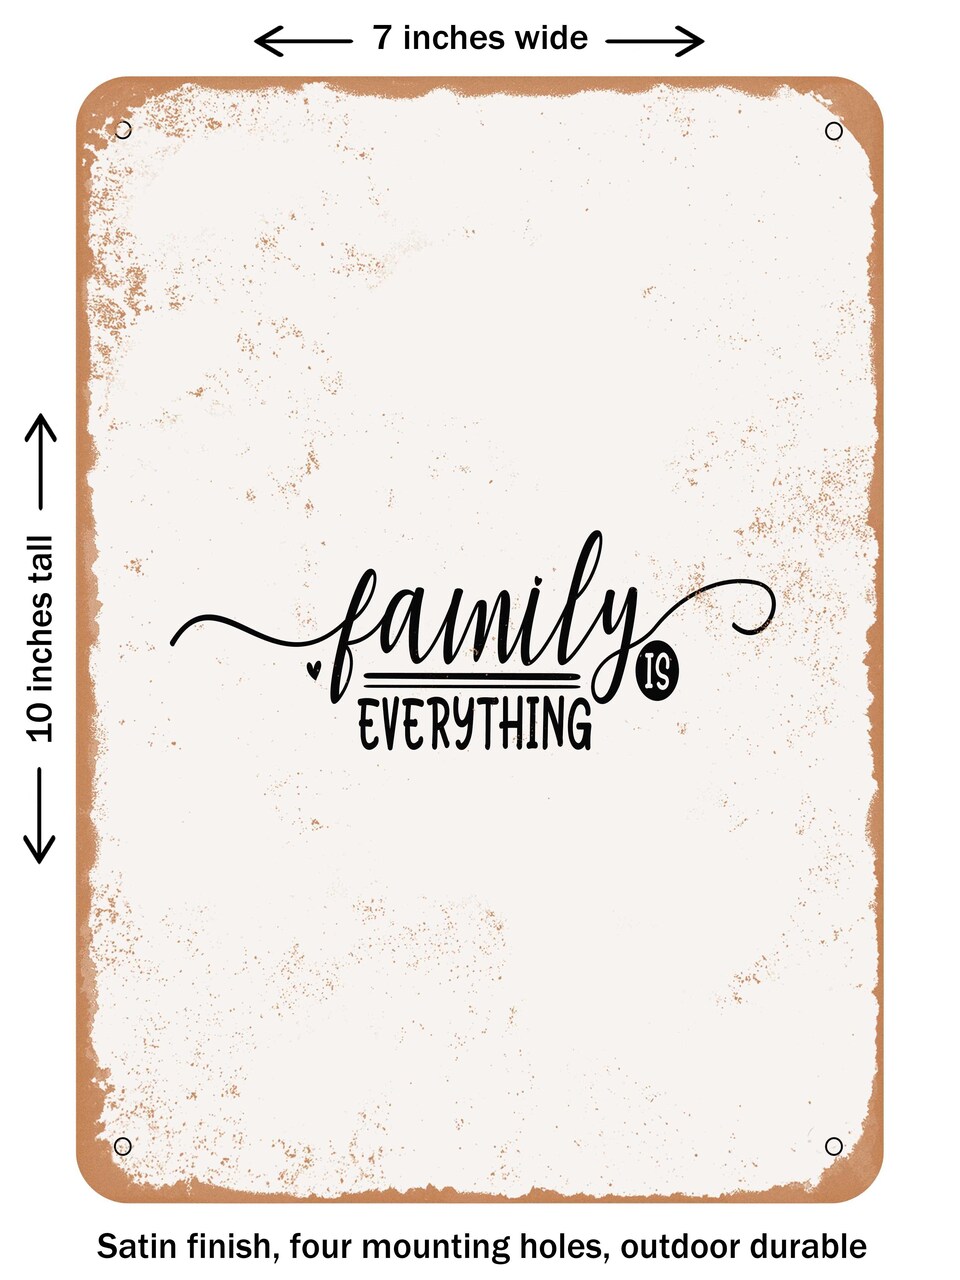 DECORATIVE METAL SIGN - Family is Everything  - Vintage Rusty Look